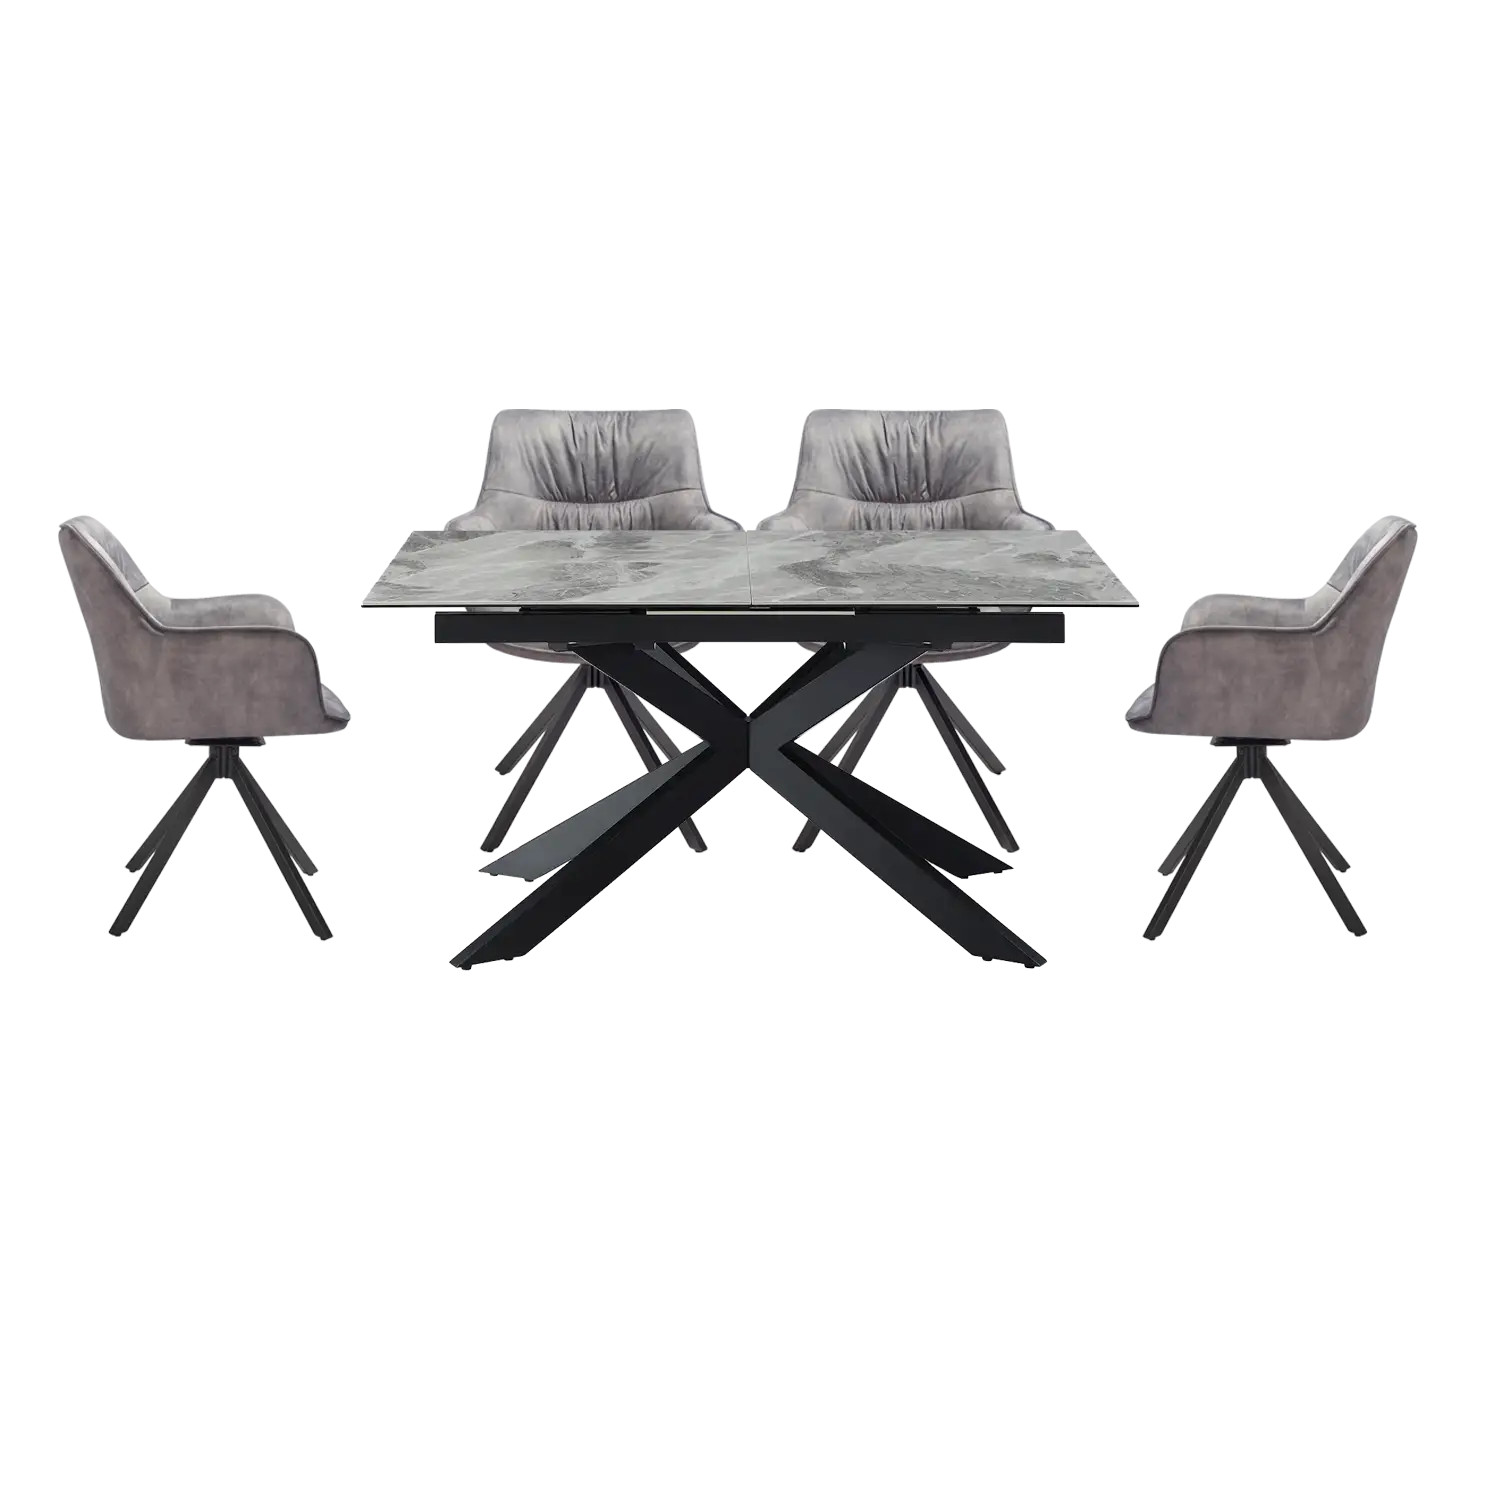 Creed Light Grey Ceramic Extendable Table with Marvel Silver Grey Chairs Dining Set